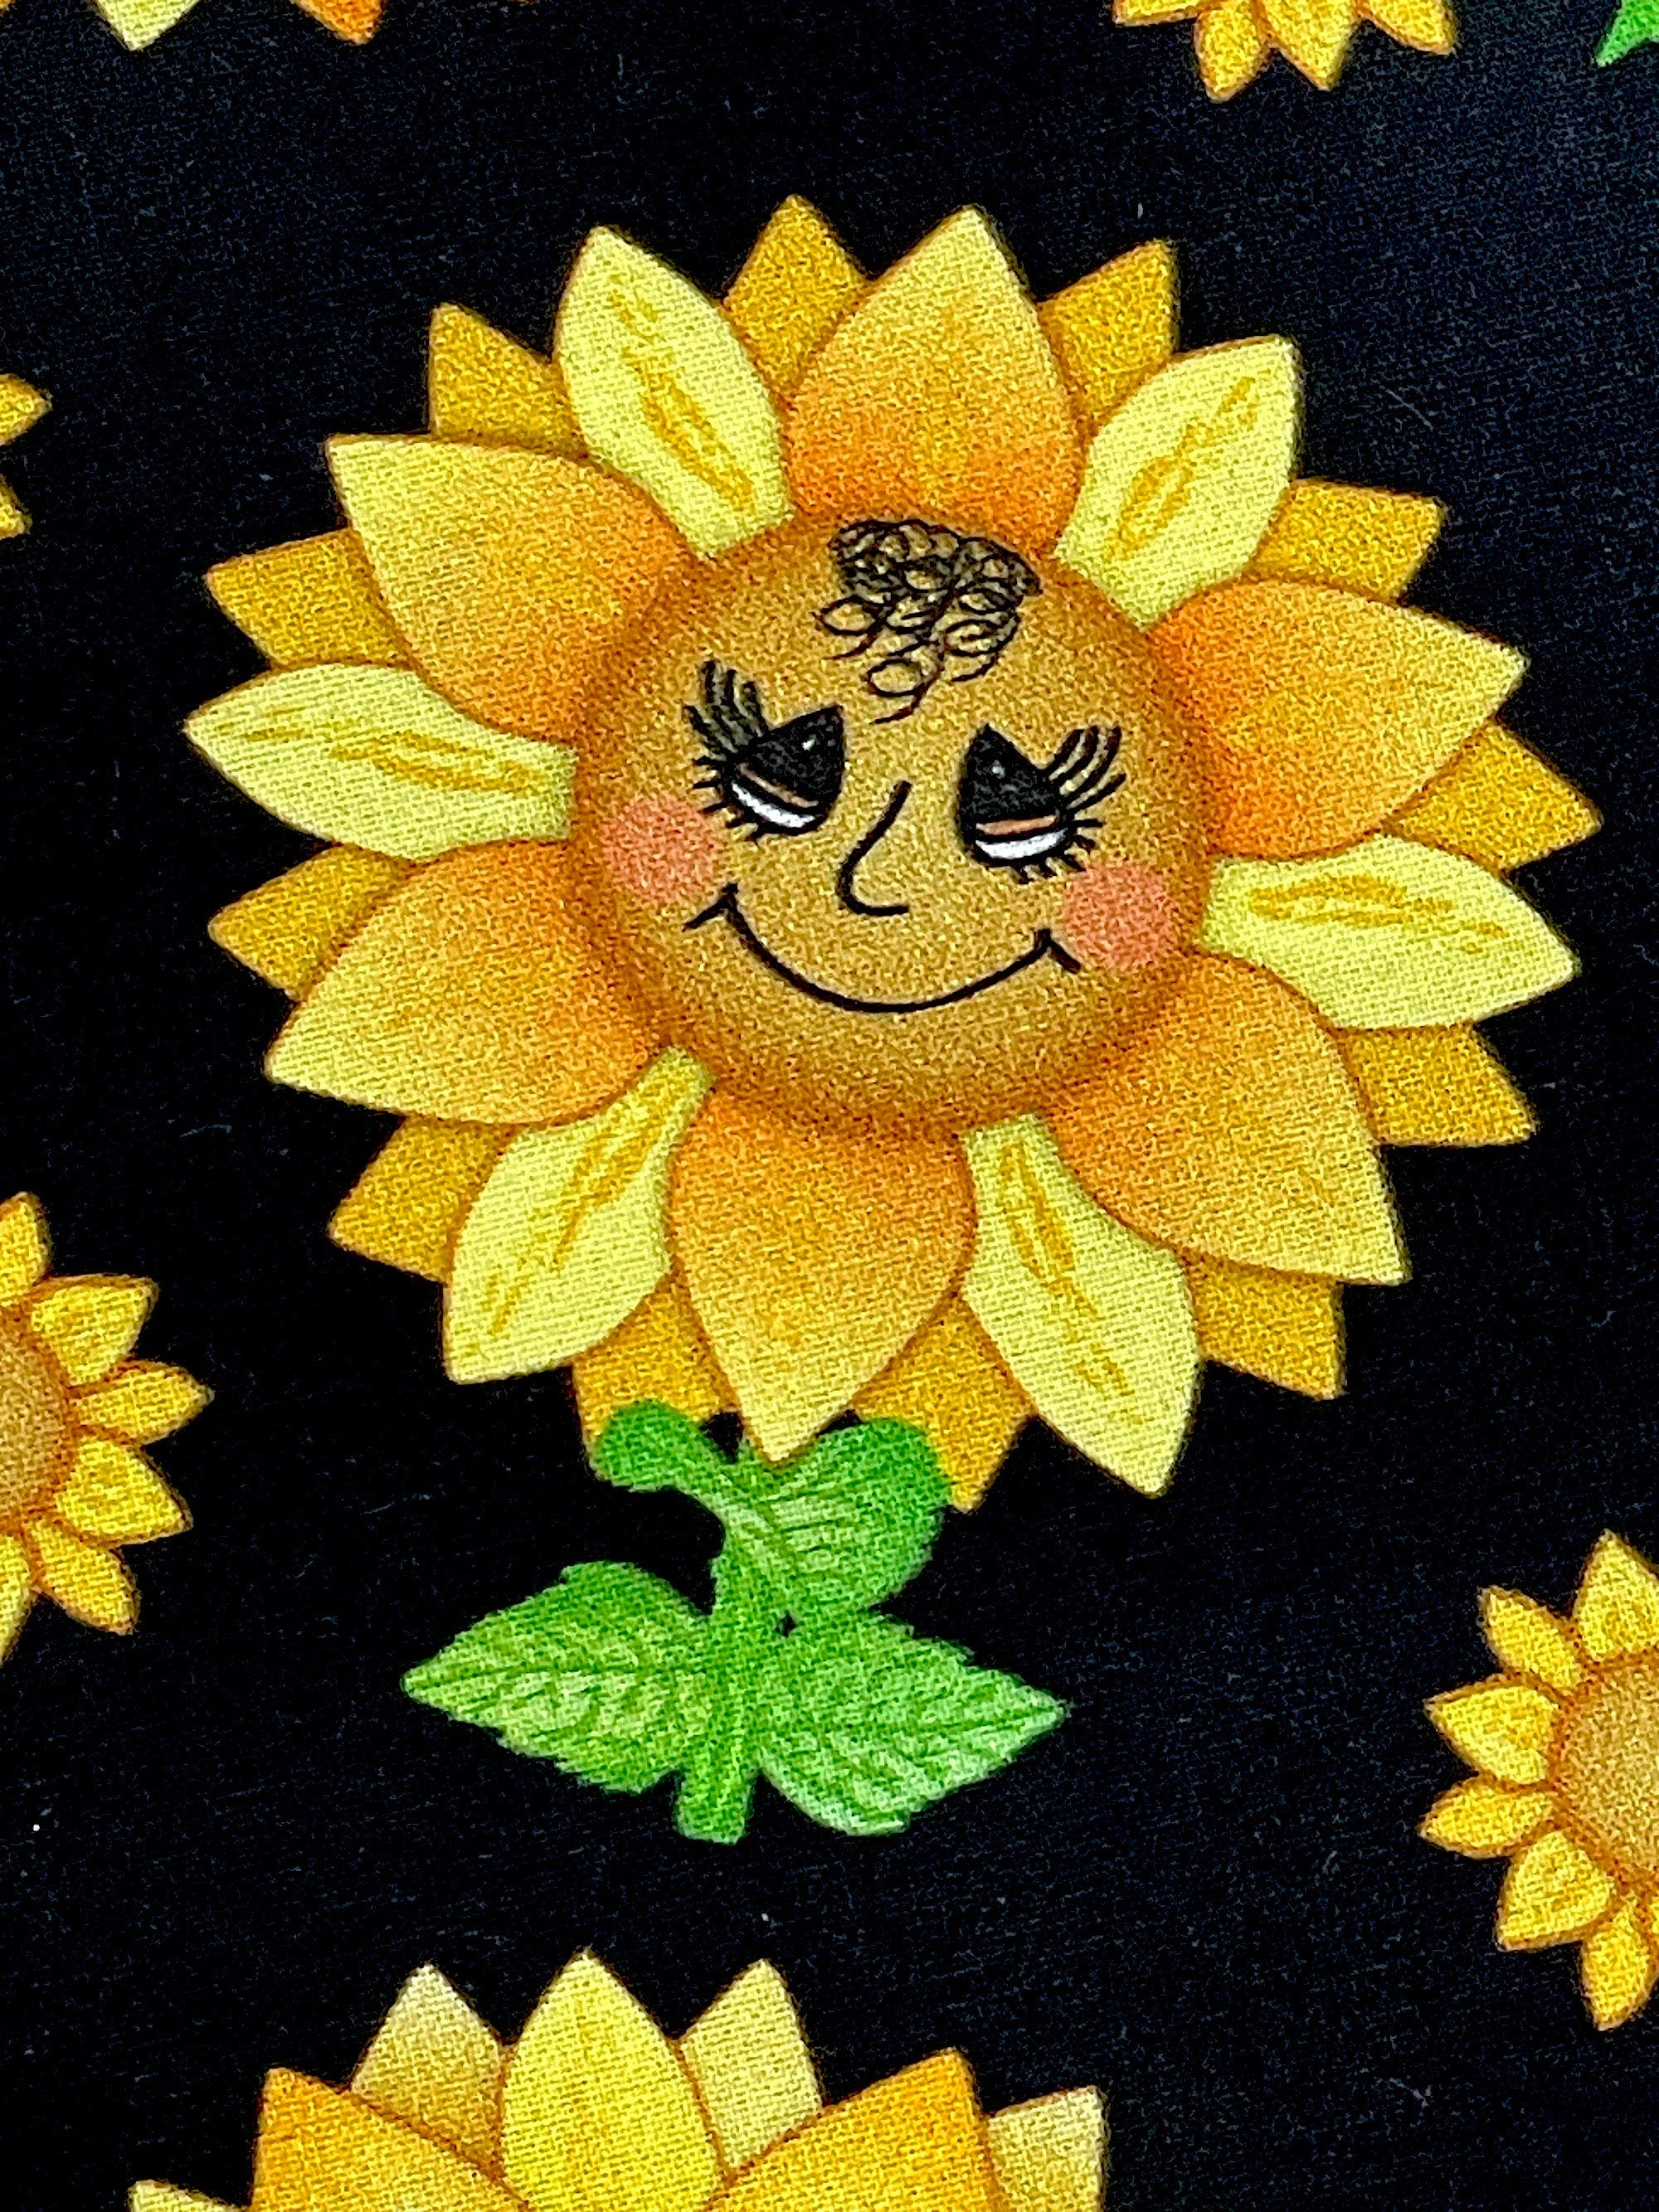 Close up of a sunflower with a face on a black background.